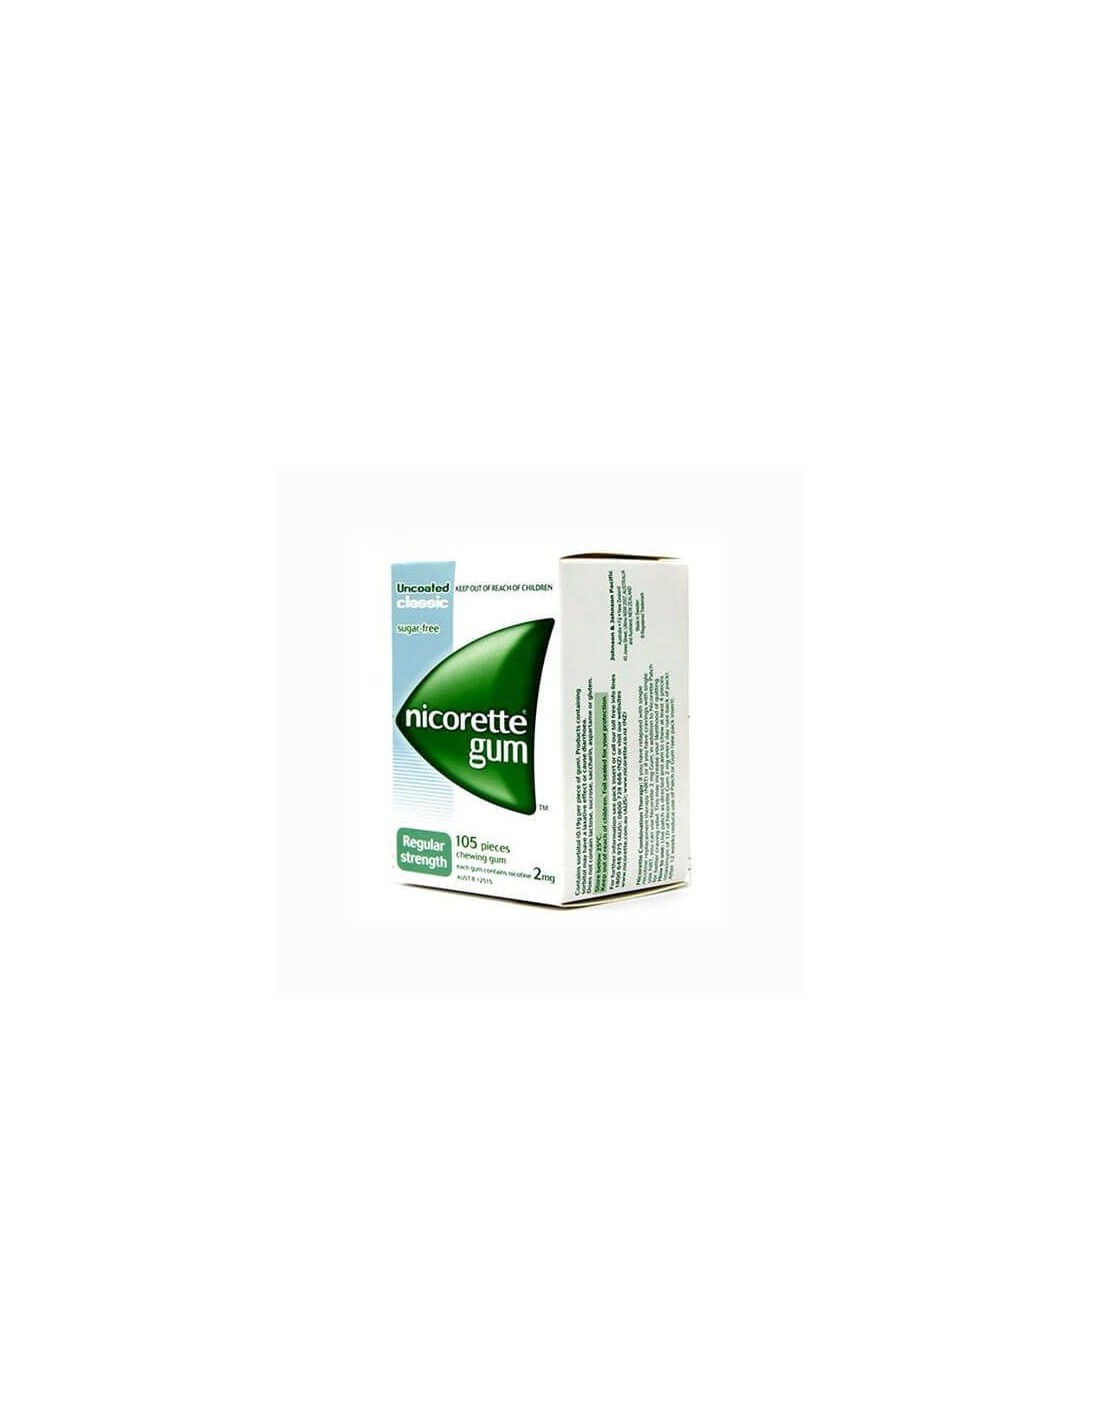 NICORETTE ICE MINT 4 MG 30 CHICLES MEDICAMENTOSOS